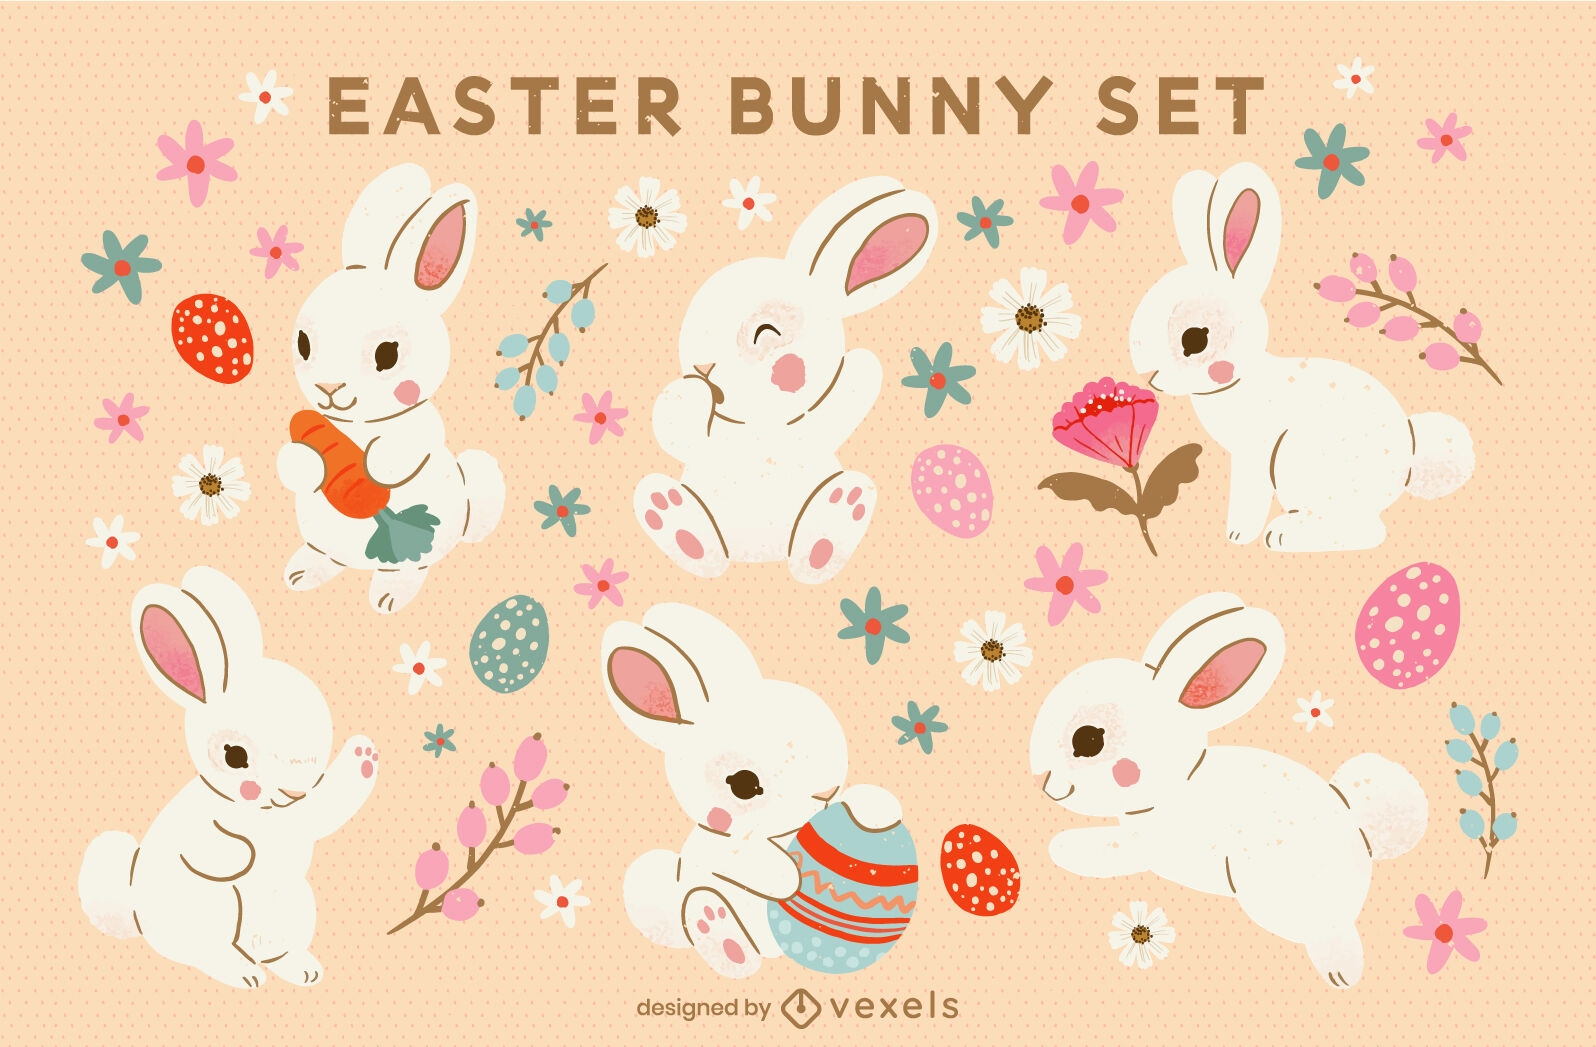 Floral easter bunny character set